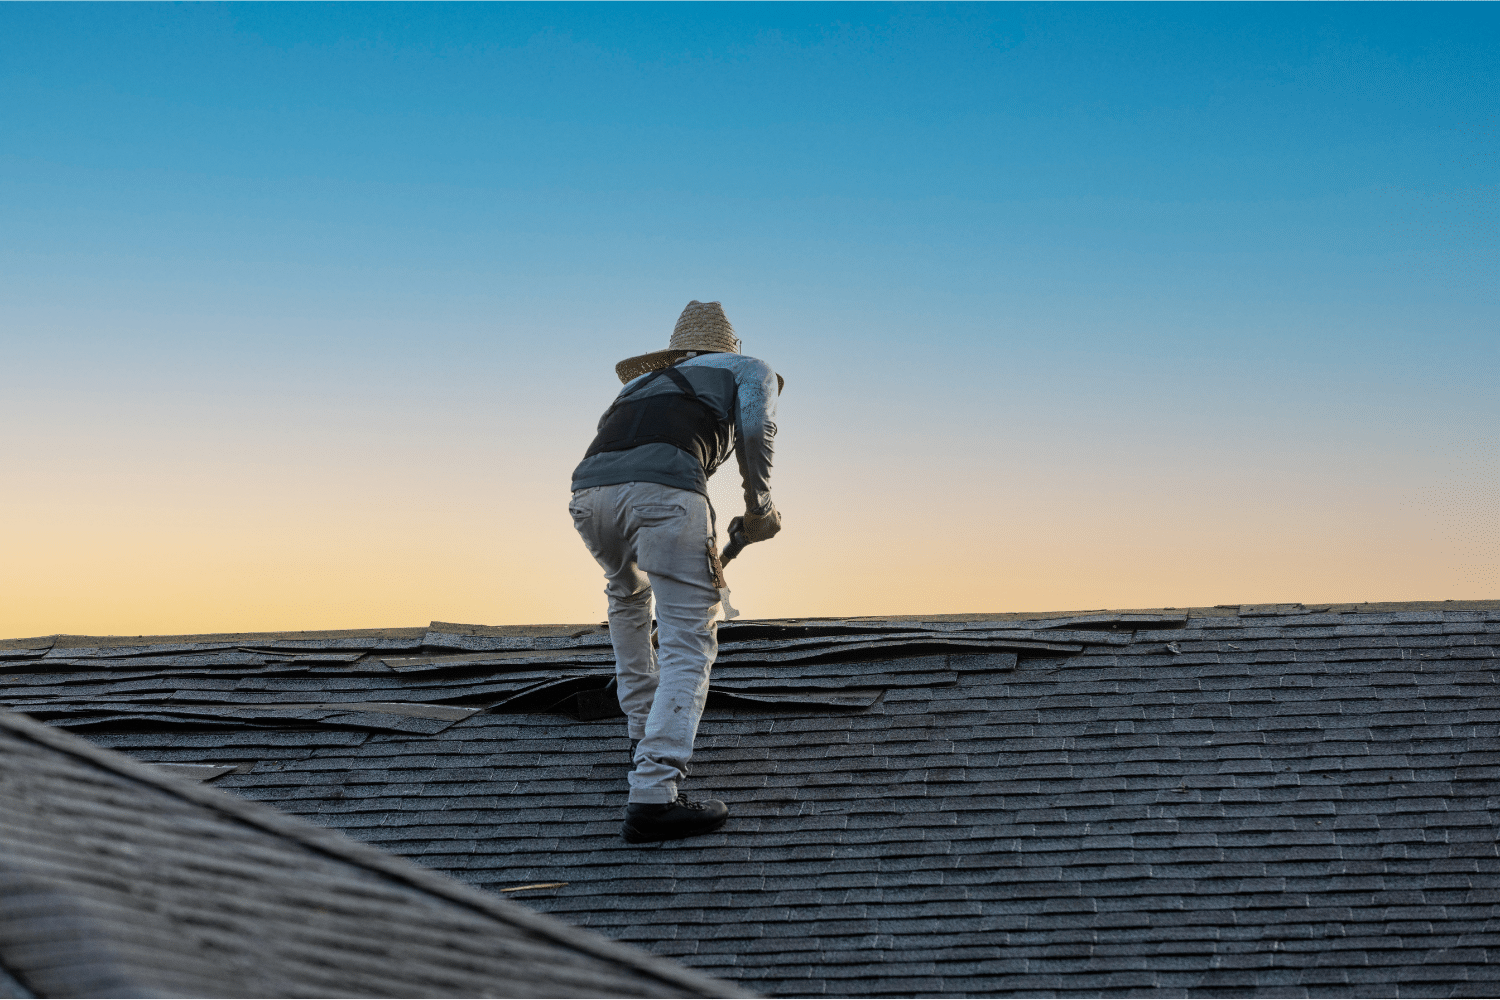 Eco-friendly roofing solutions for energy efficiency